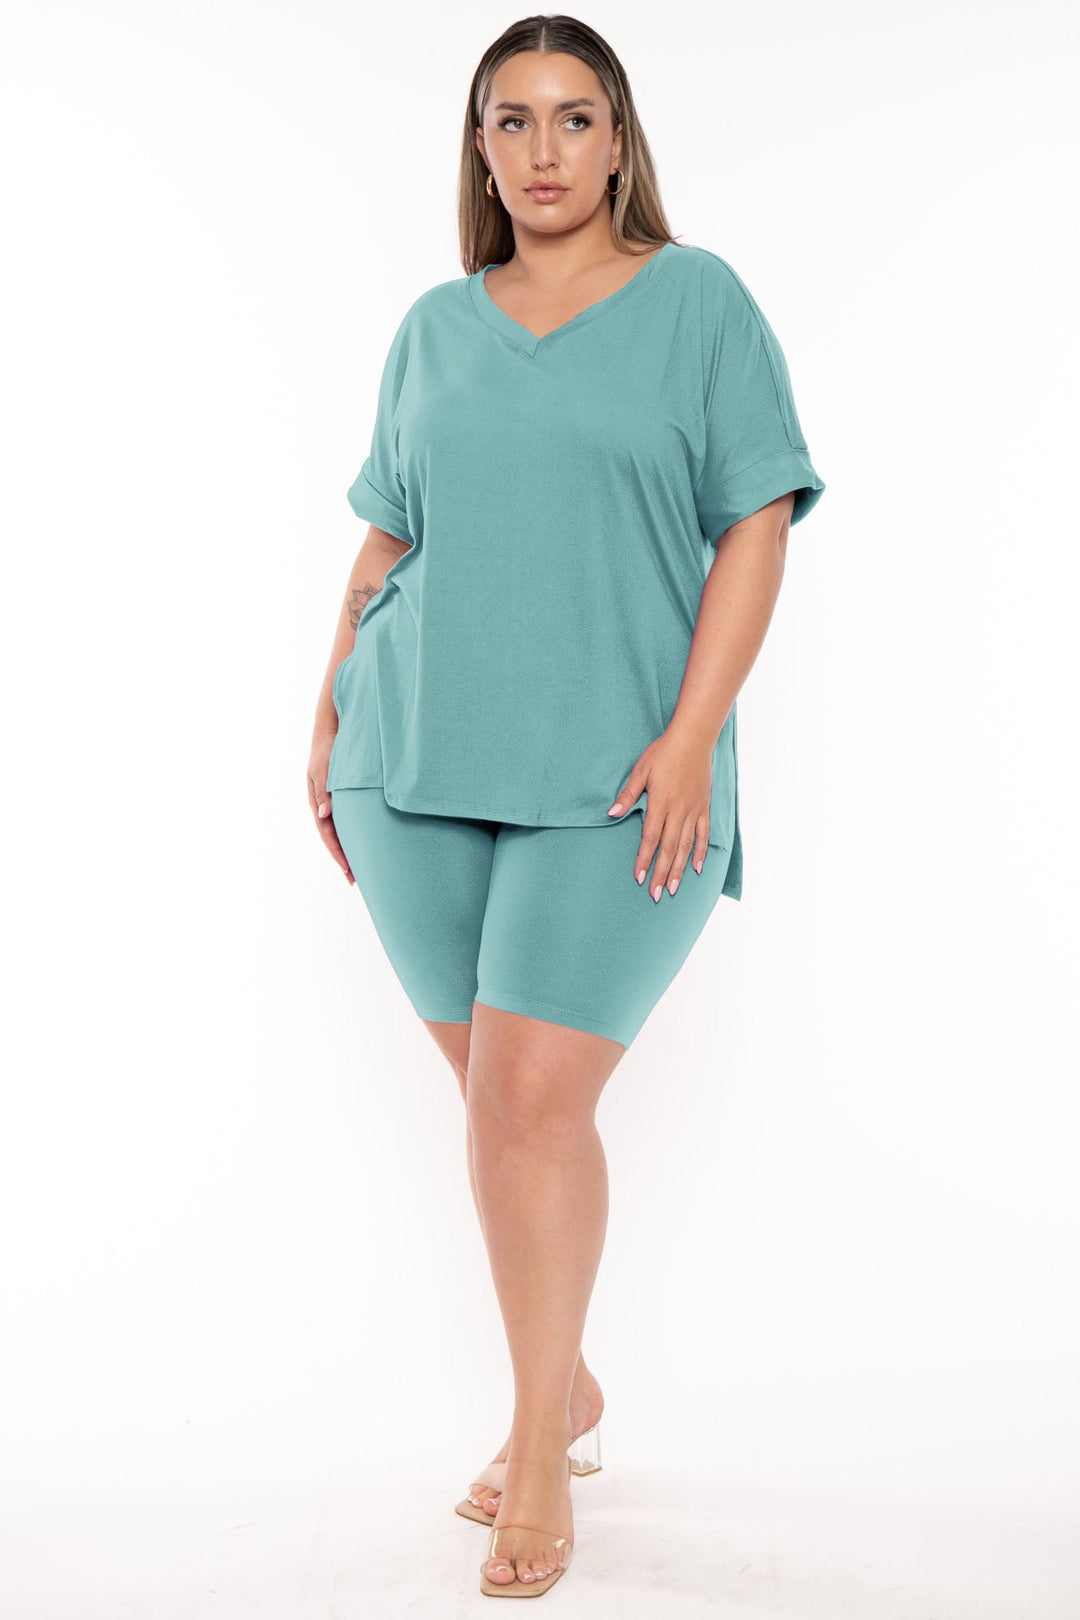 Zenana Jumpsuits and Rompers 1X / Teal Plus Size Lexia top and Short Set- Teal